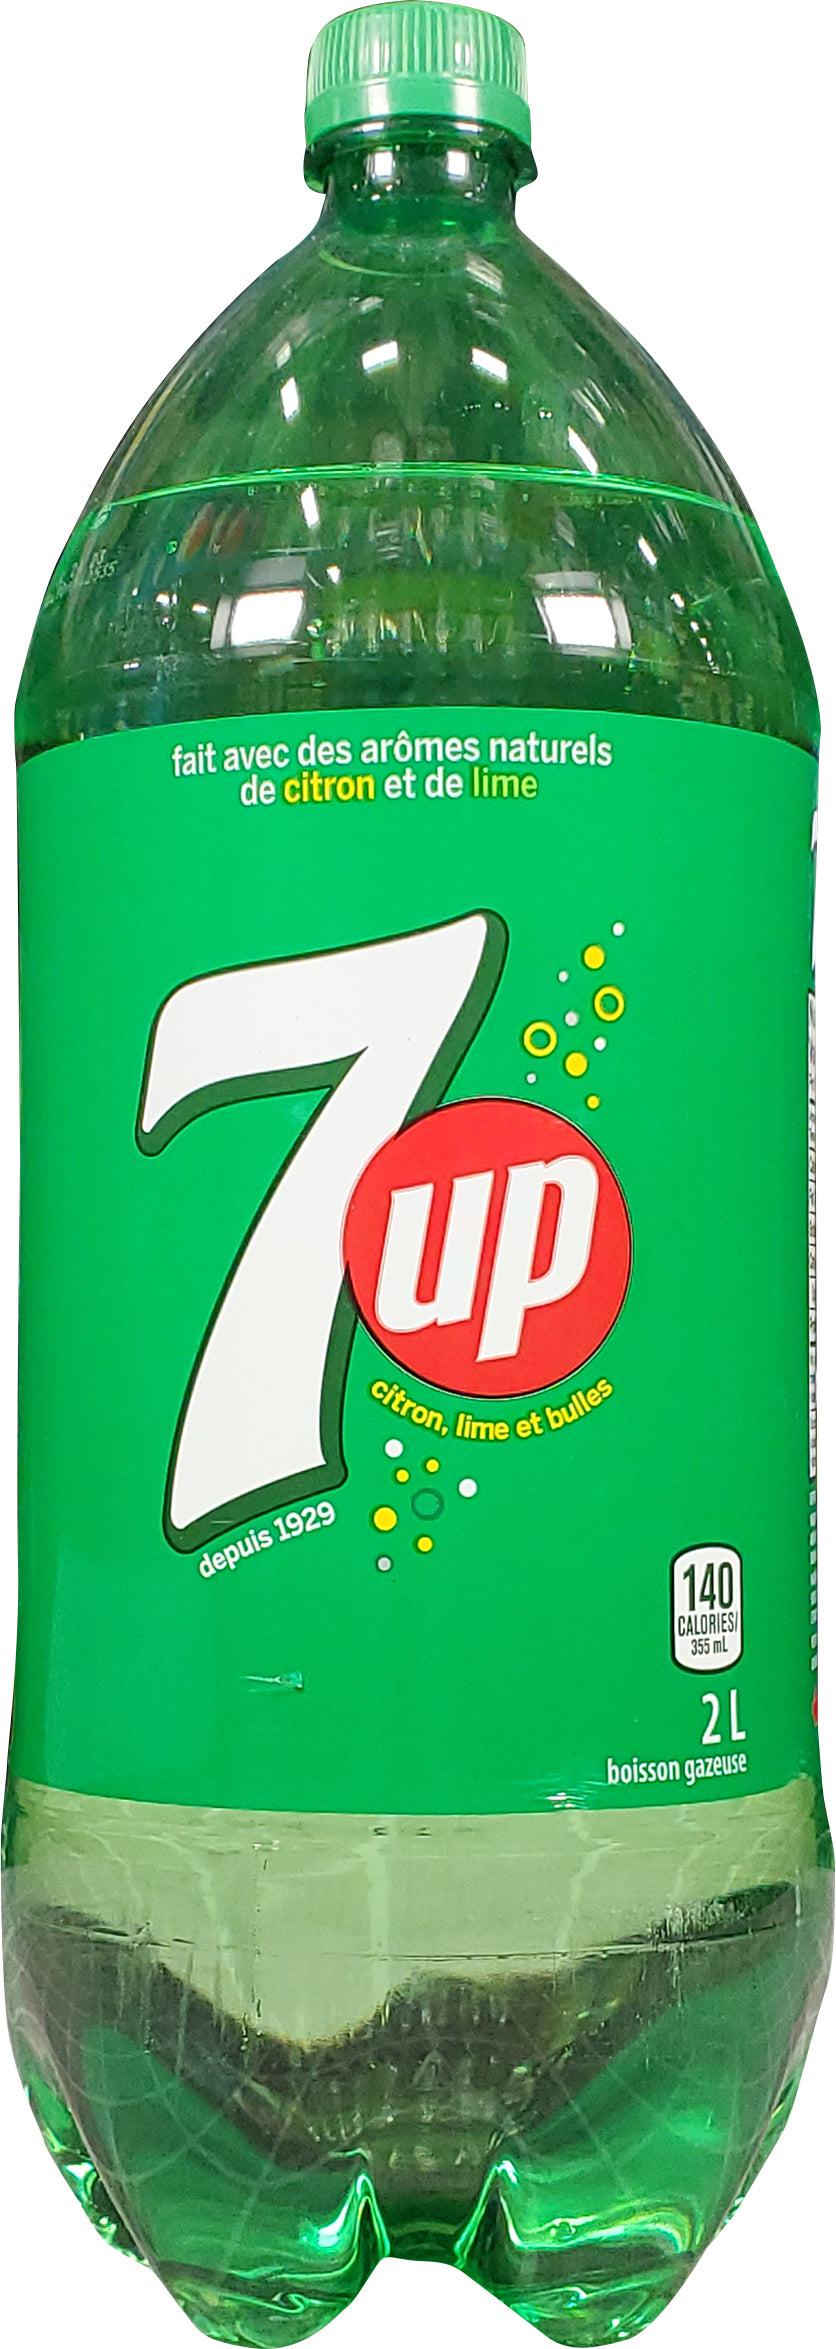 7UP Diet Seven Up 6 Pk 8 Oz Can 6 ct